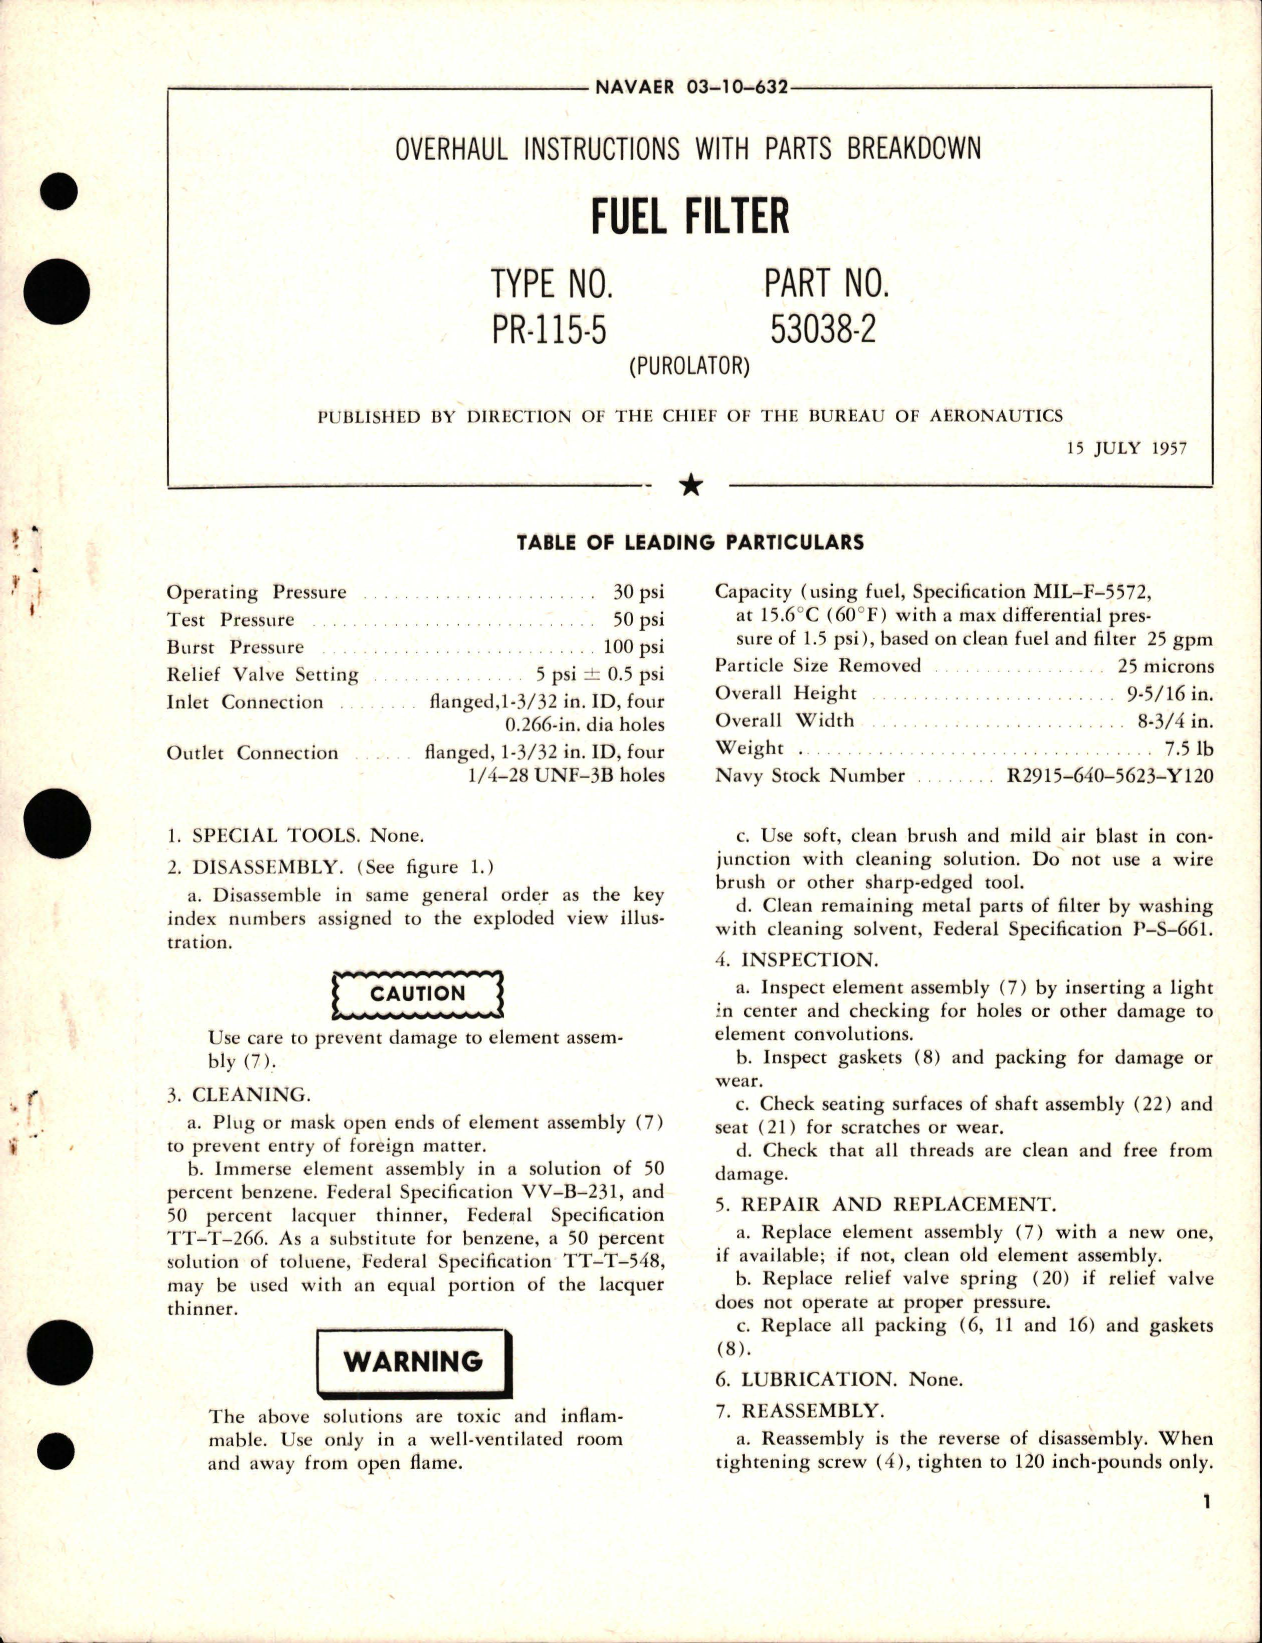 Sample page 1 from AirCorps Library document: Overhaul Instructions with Parts Breakdown for Fuel Filter - Type PR-115-5 - Part 53038-2